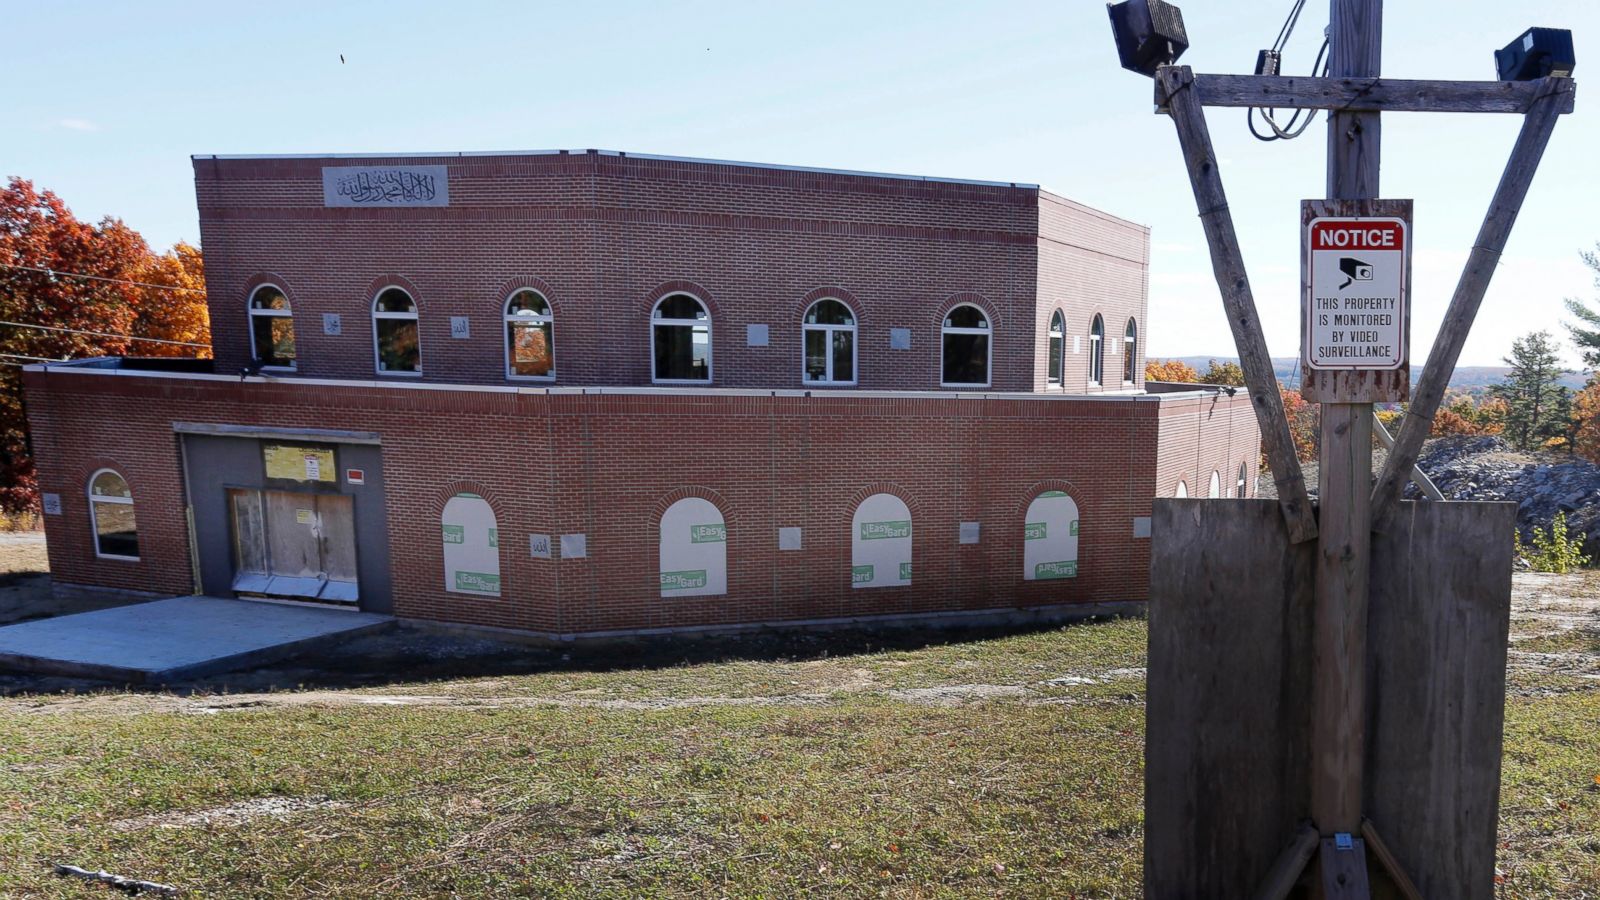 A mosque grows slowly amid opposition in New Hampshire